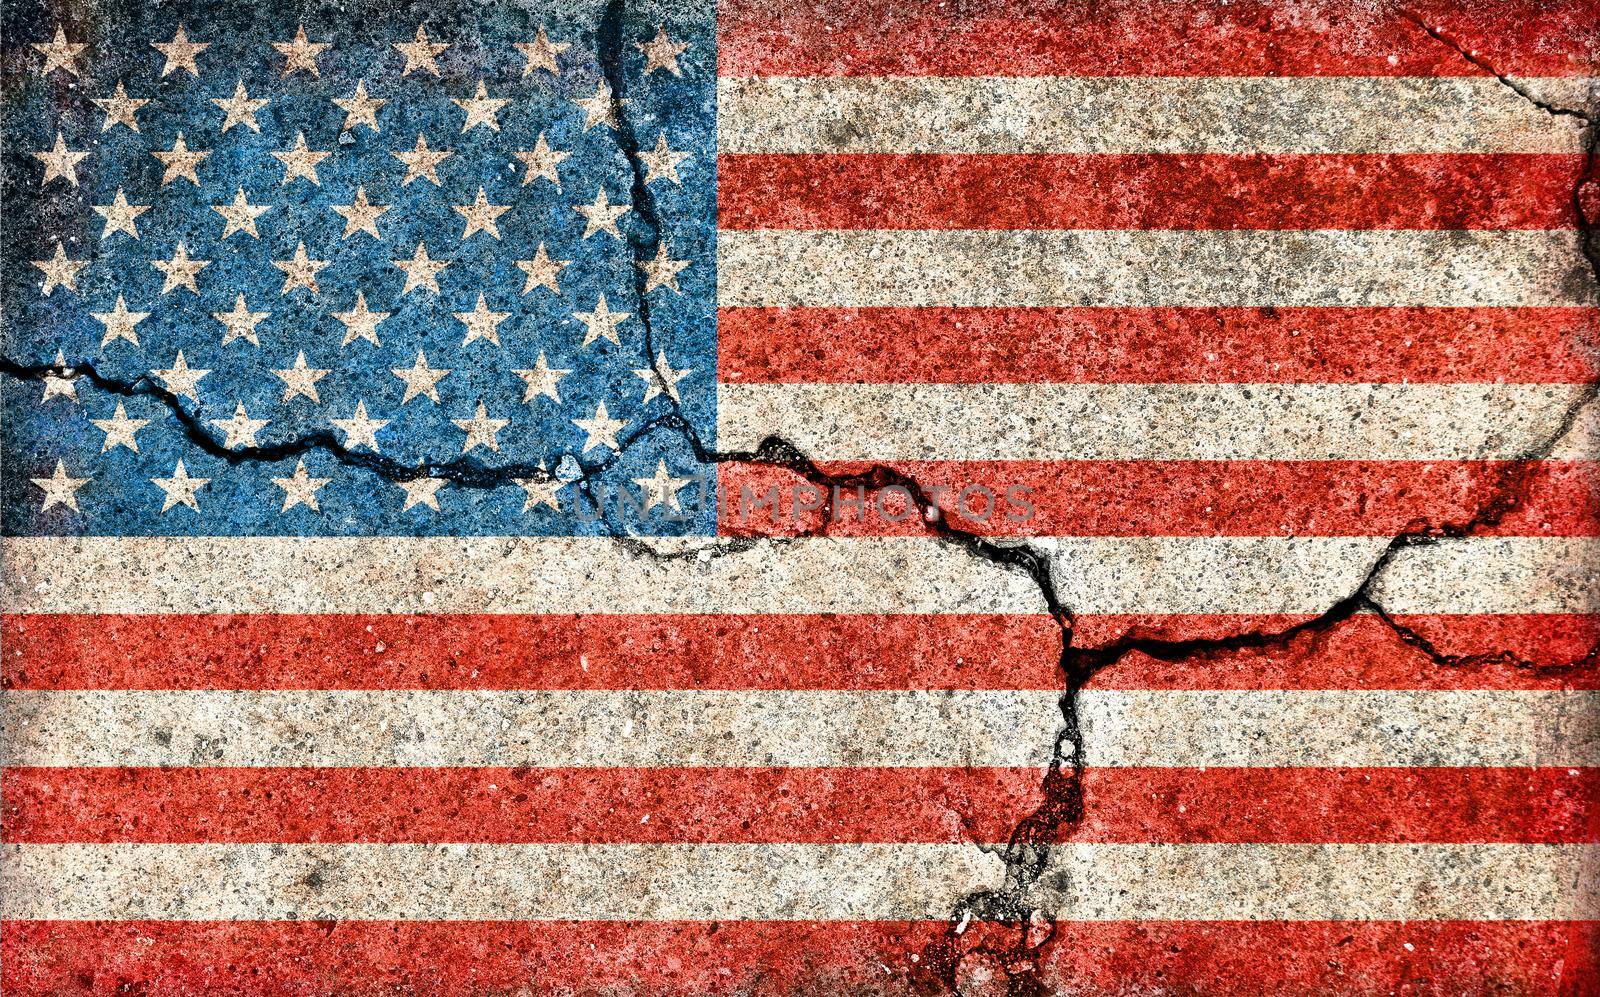 Grunge country flag illustration (cracked concrete background) / USA, United states of America by barks